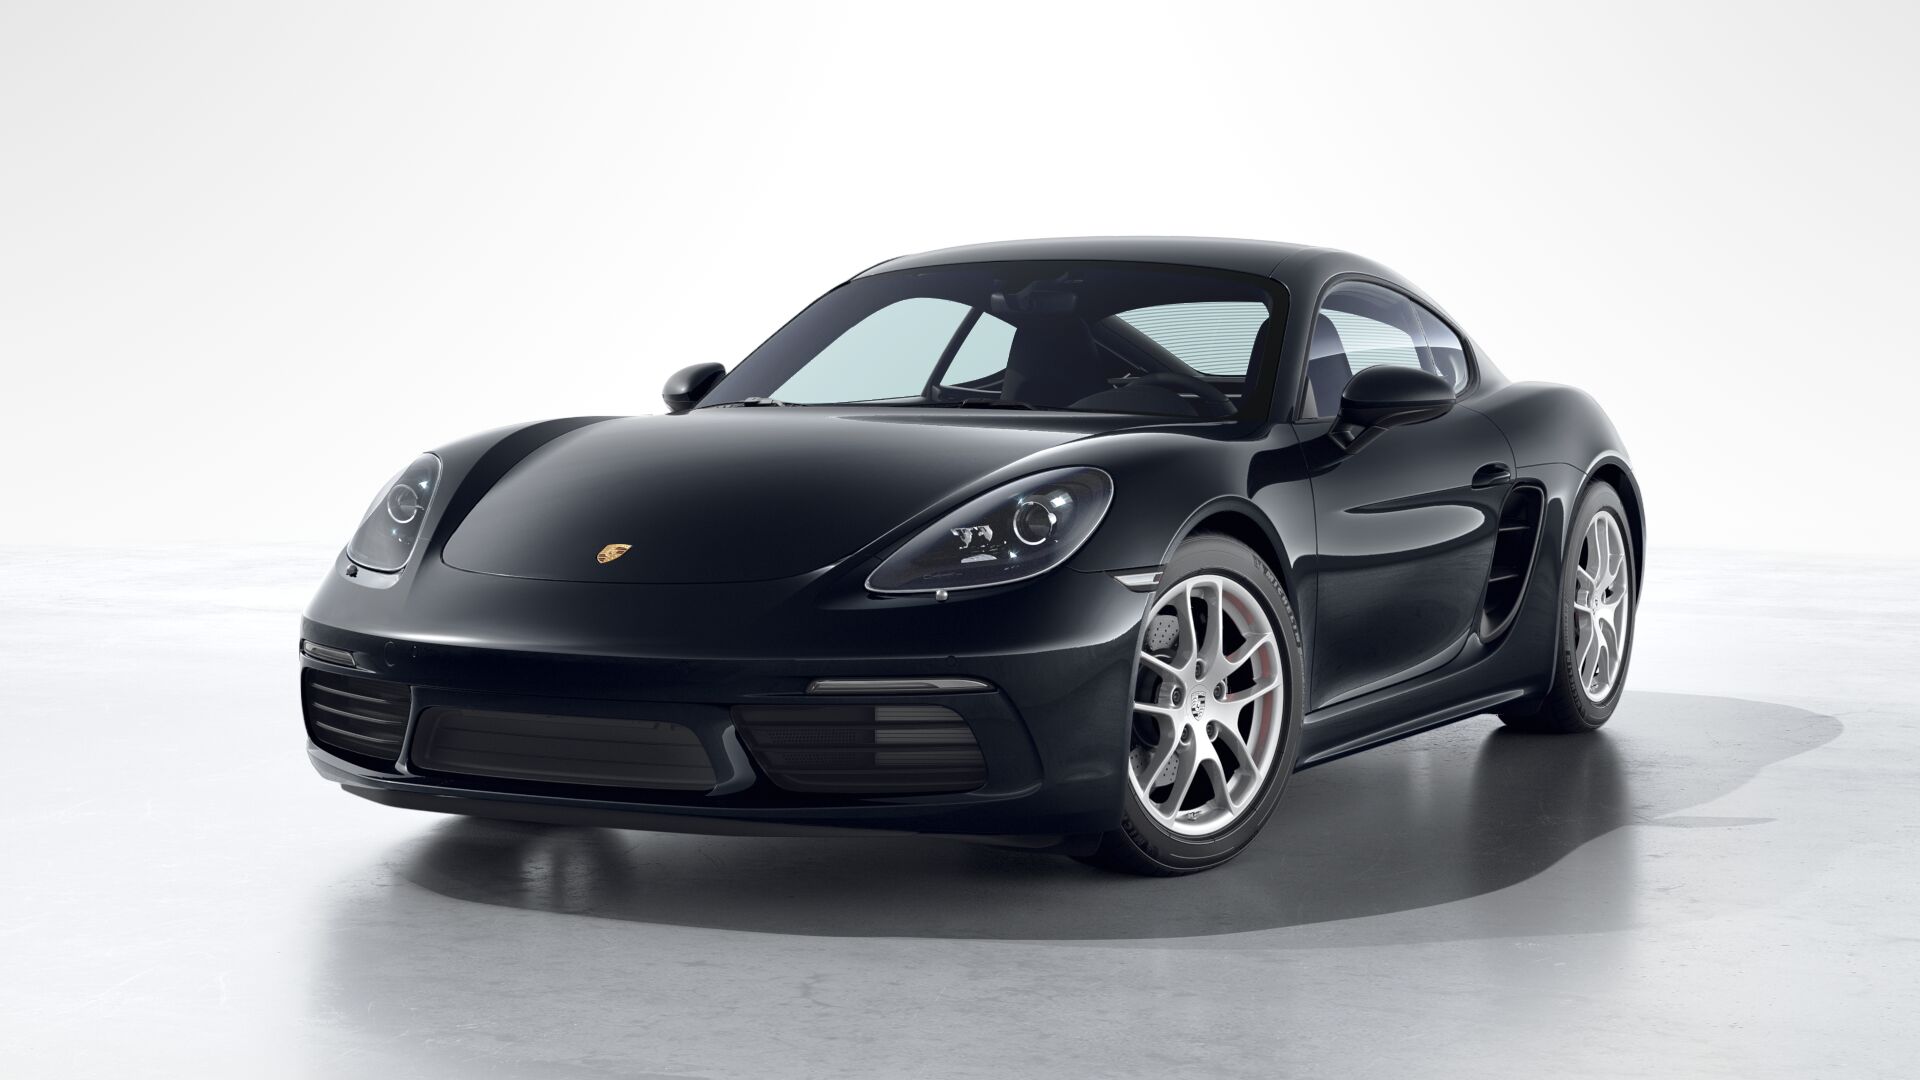 Find out more about the latest Porsche Taycan electric online at Porsche Fort Myers or find a local Porsche Center near you in Cape Coral, Florida.